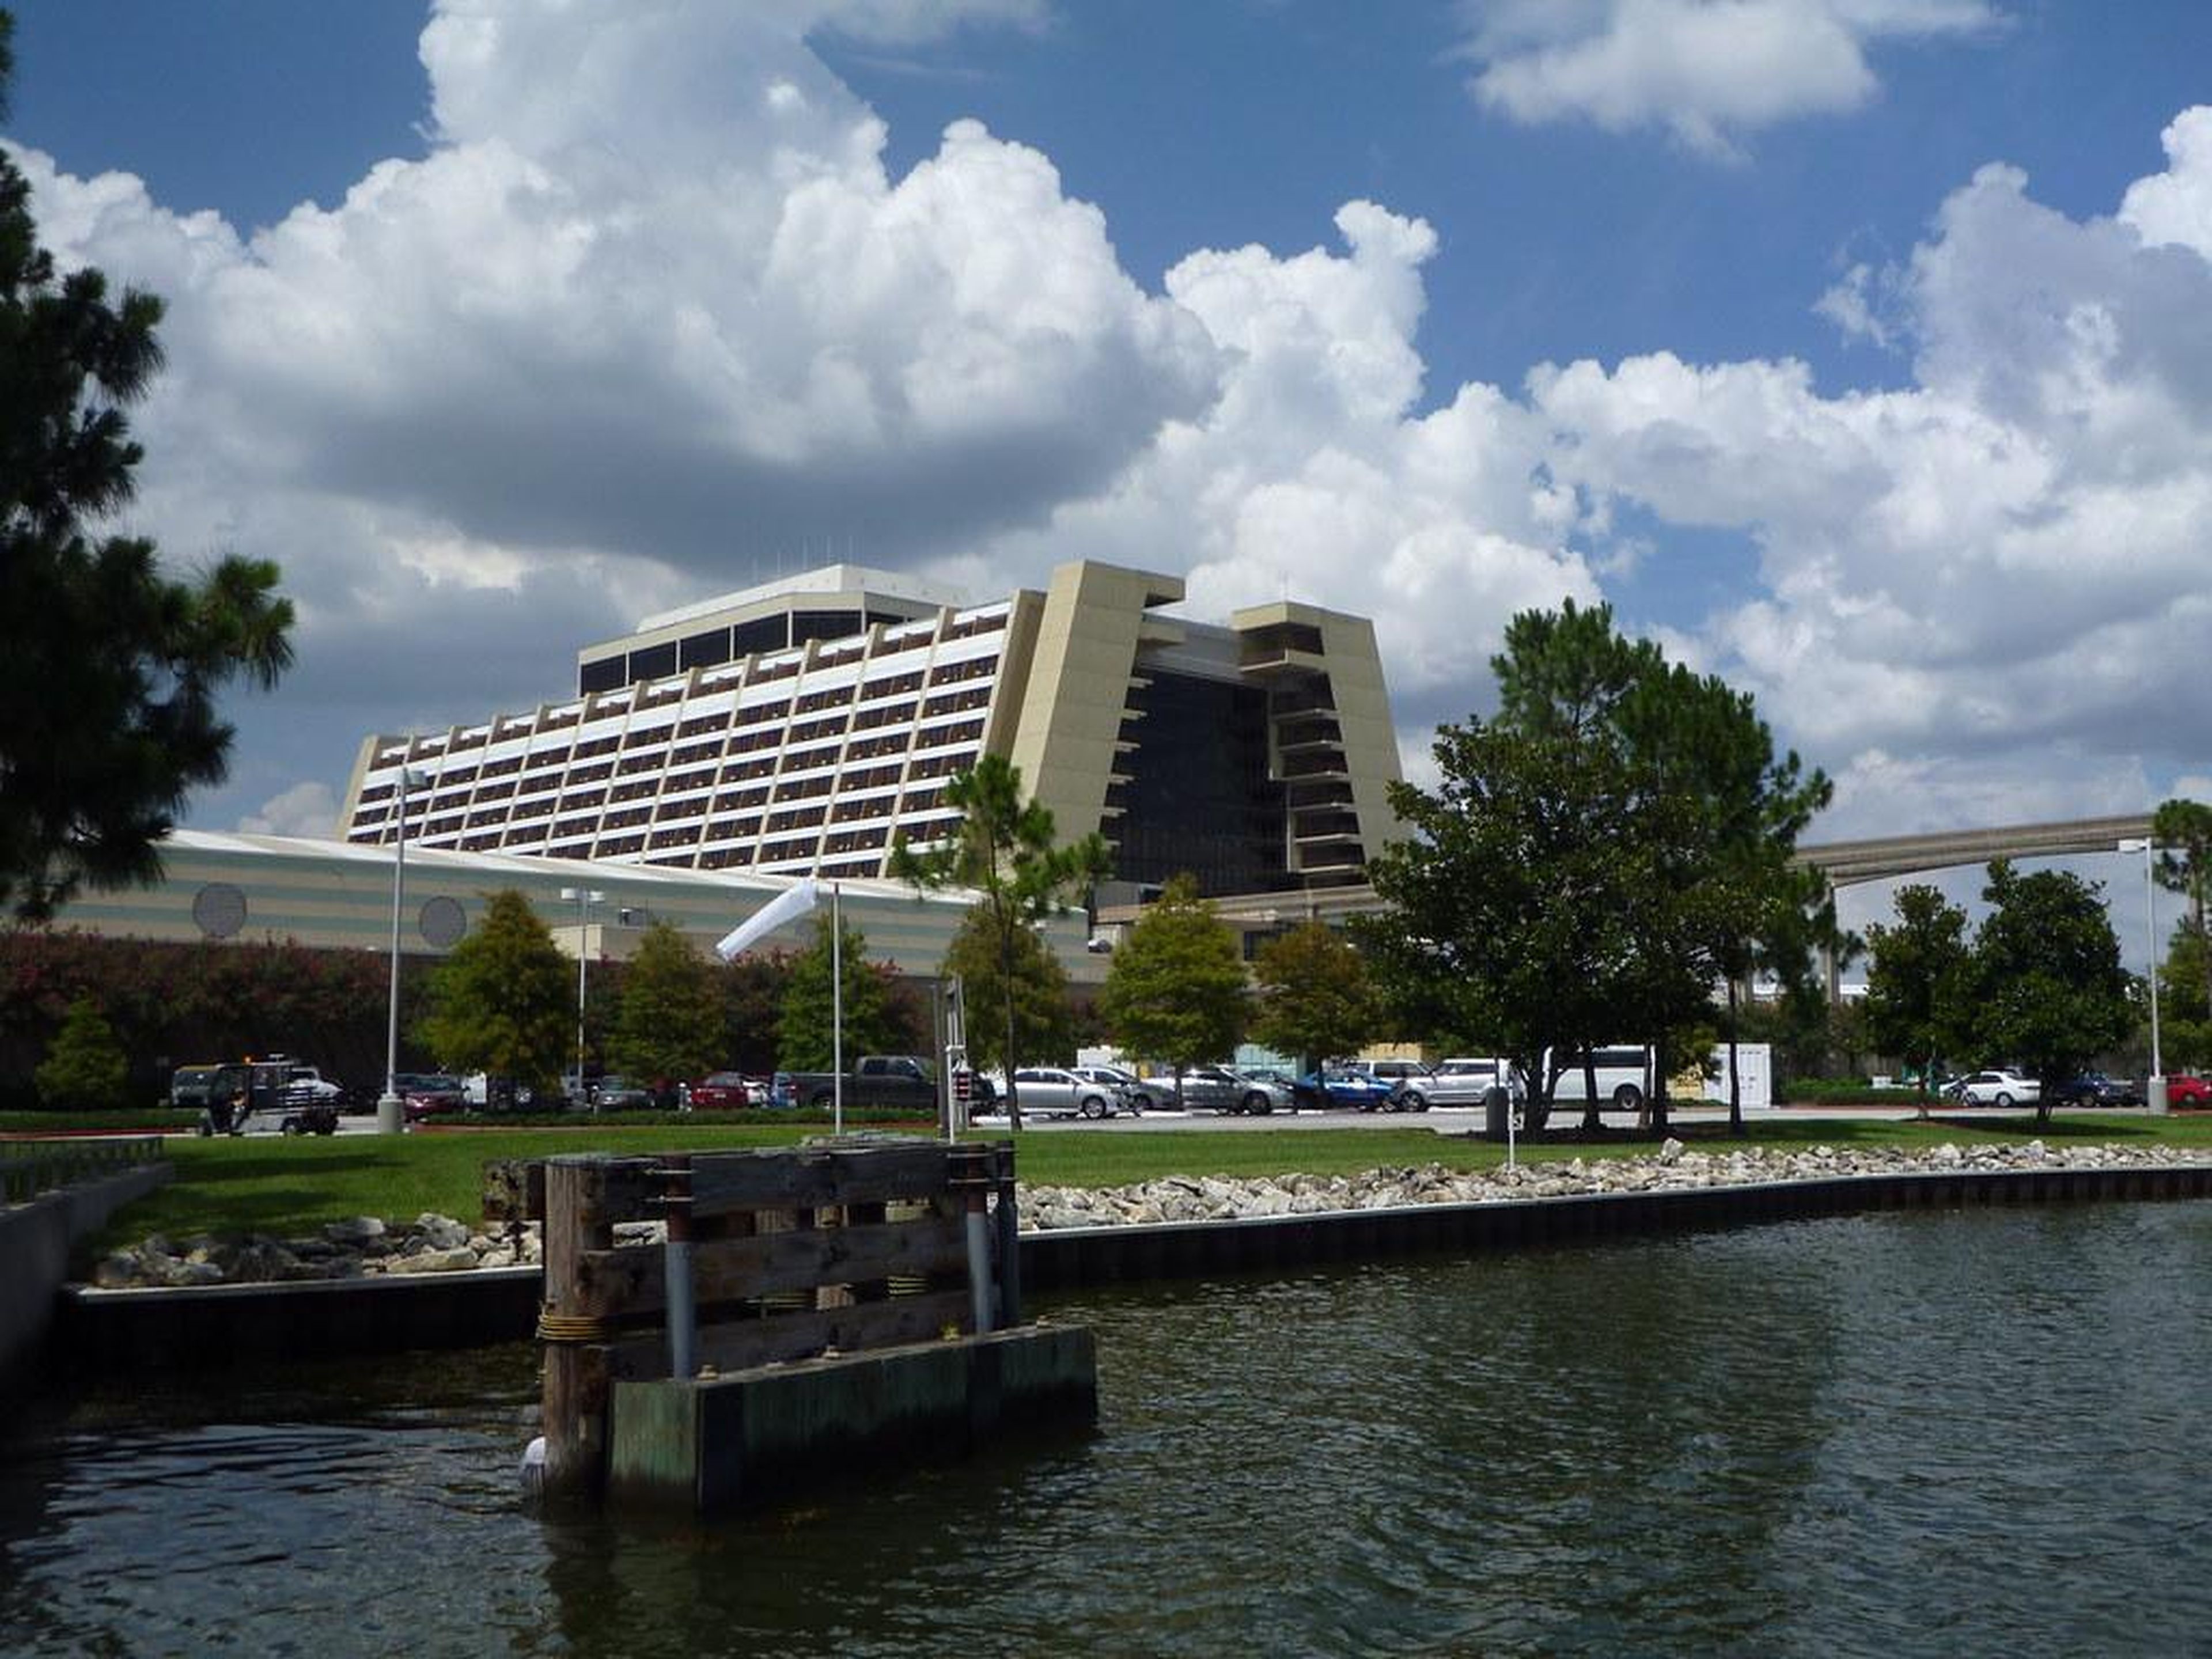 A man caused a lockdown of Disney's Contemporary Resort.